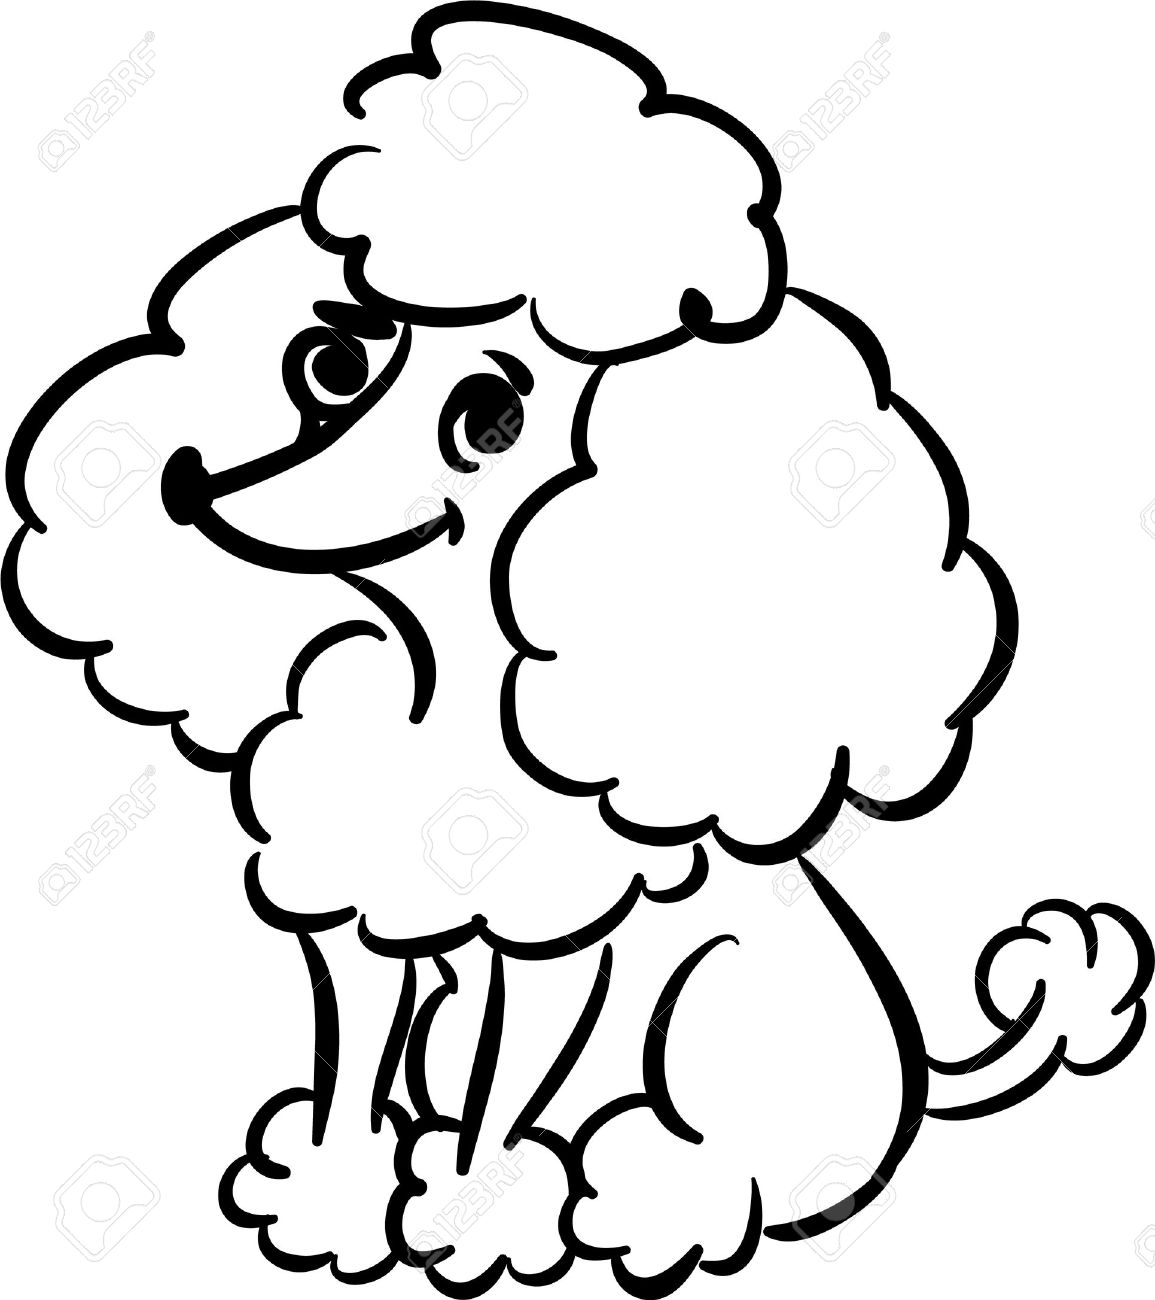 ... poodle silhouette vector